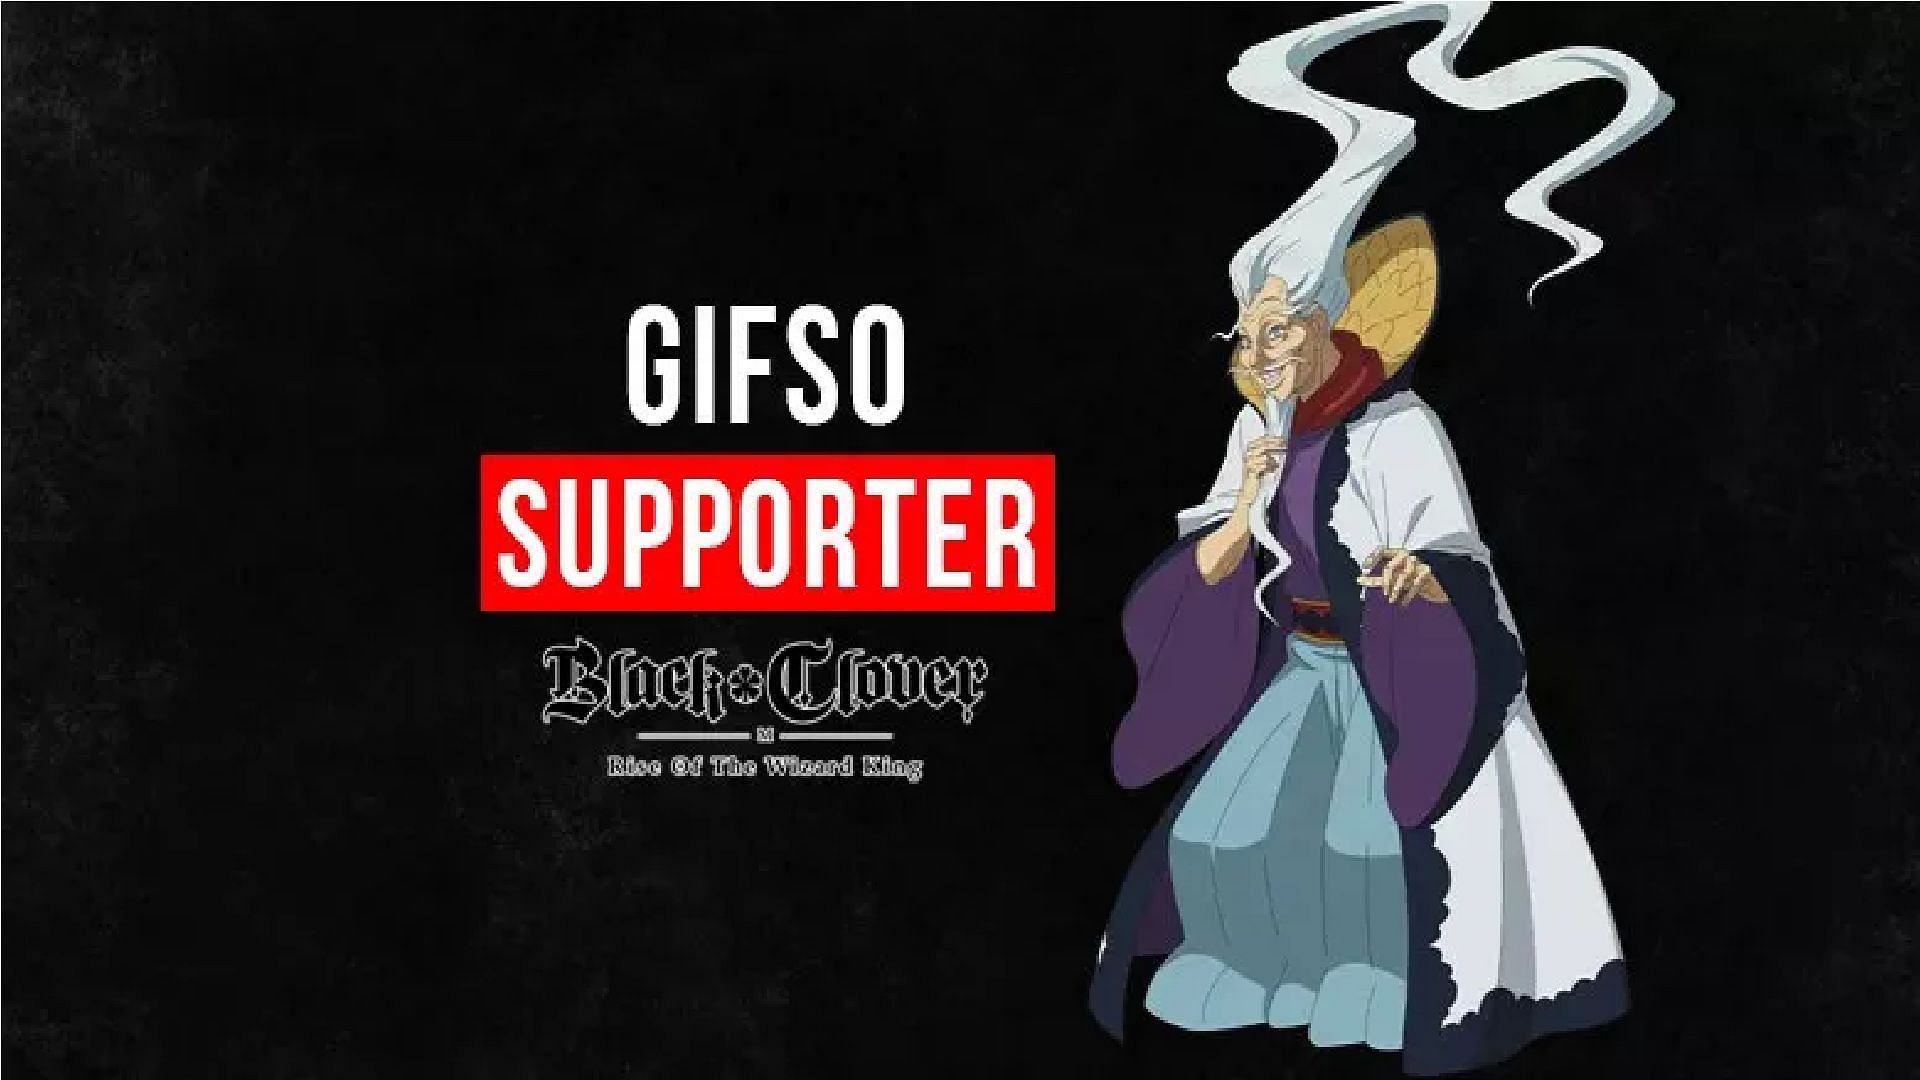 Gifso as a Support can support your team perfectly. (Image via Vic Game Studios)